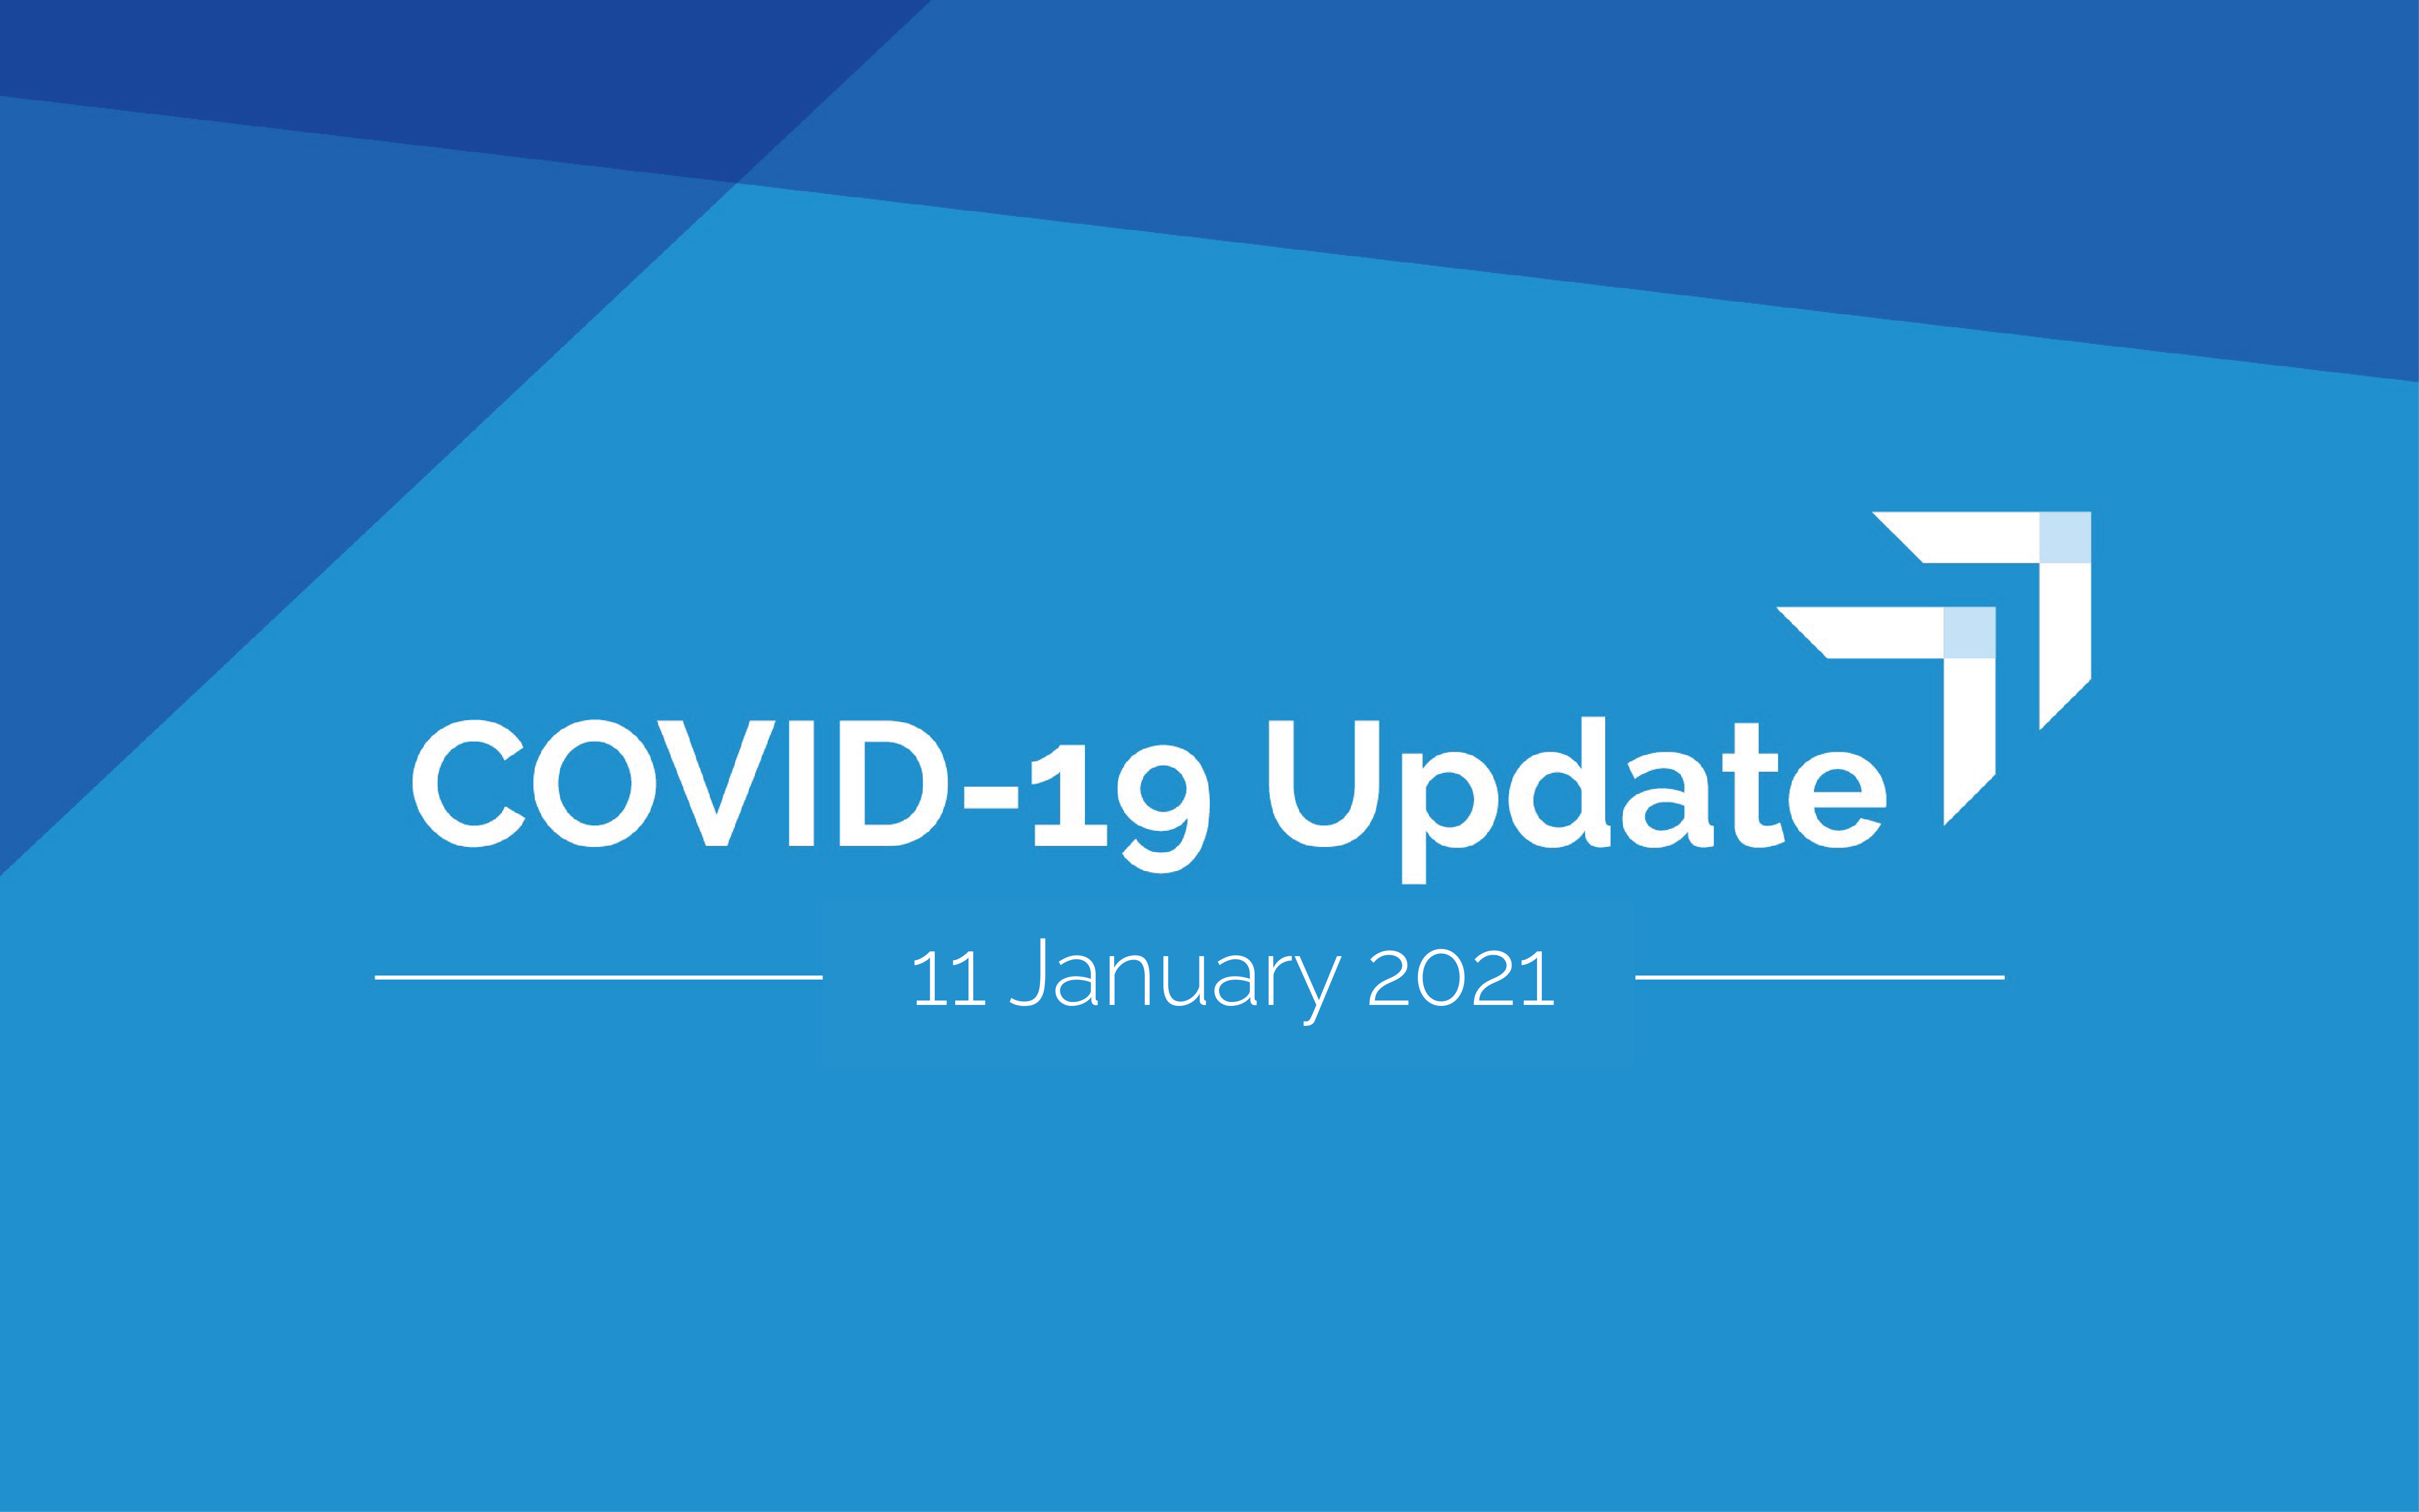 Important COVID-19 Update